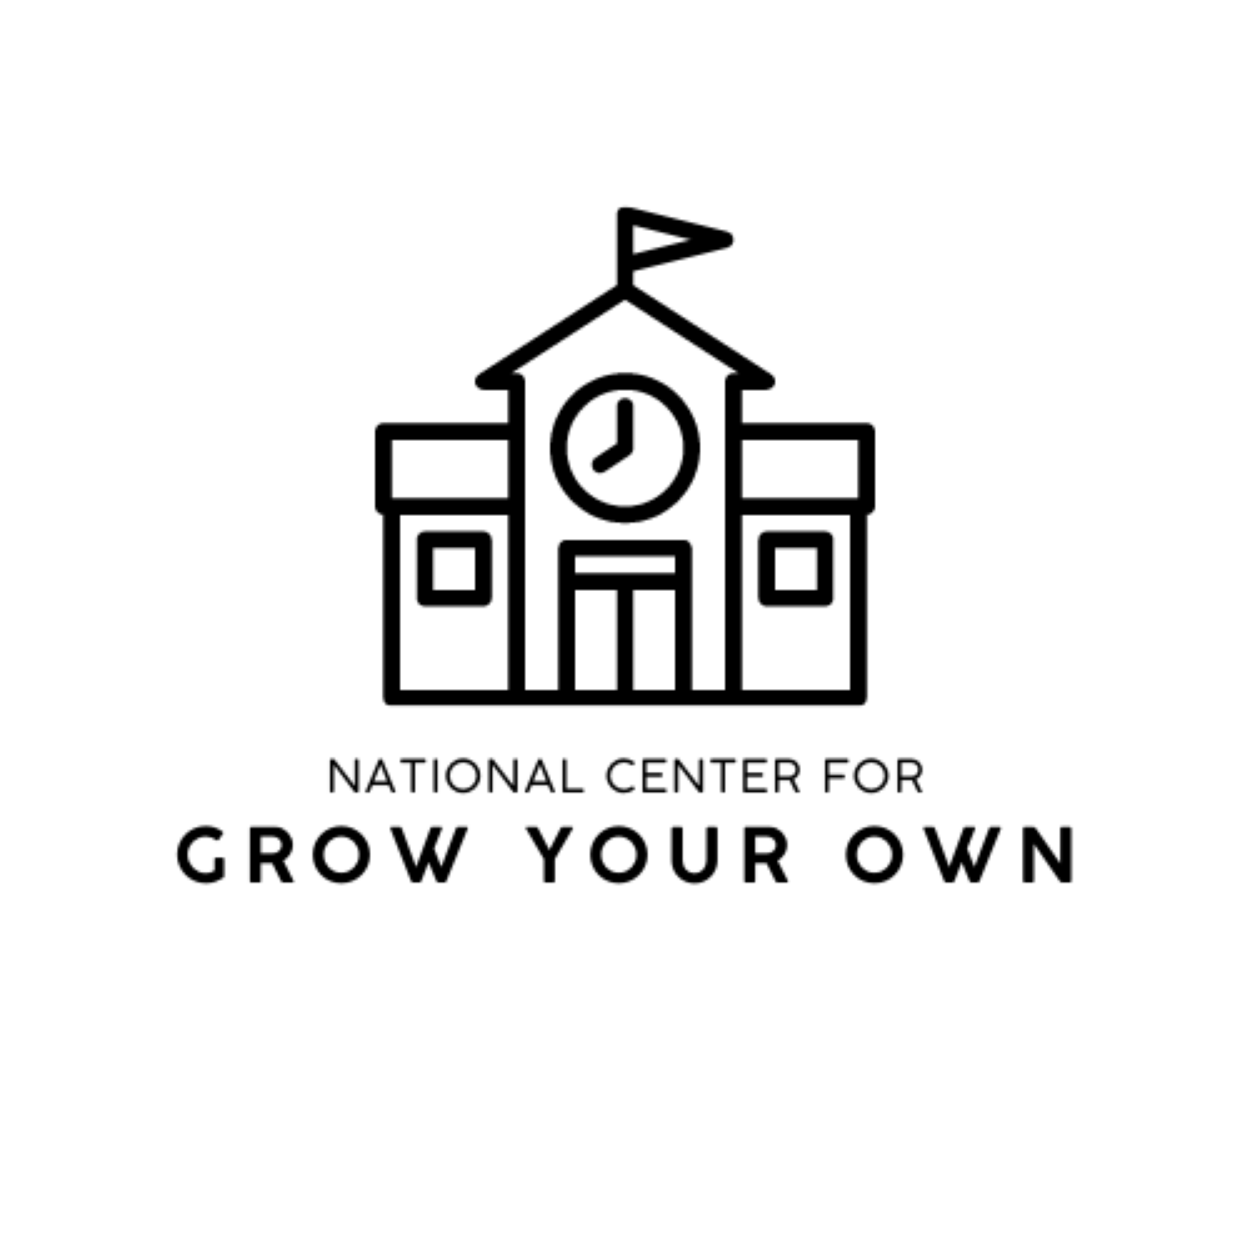 National Center for Grow Your Own